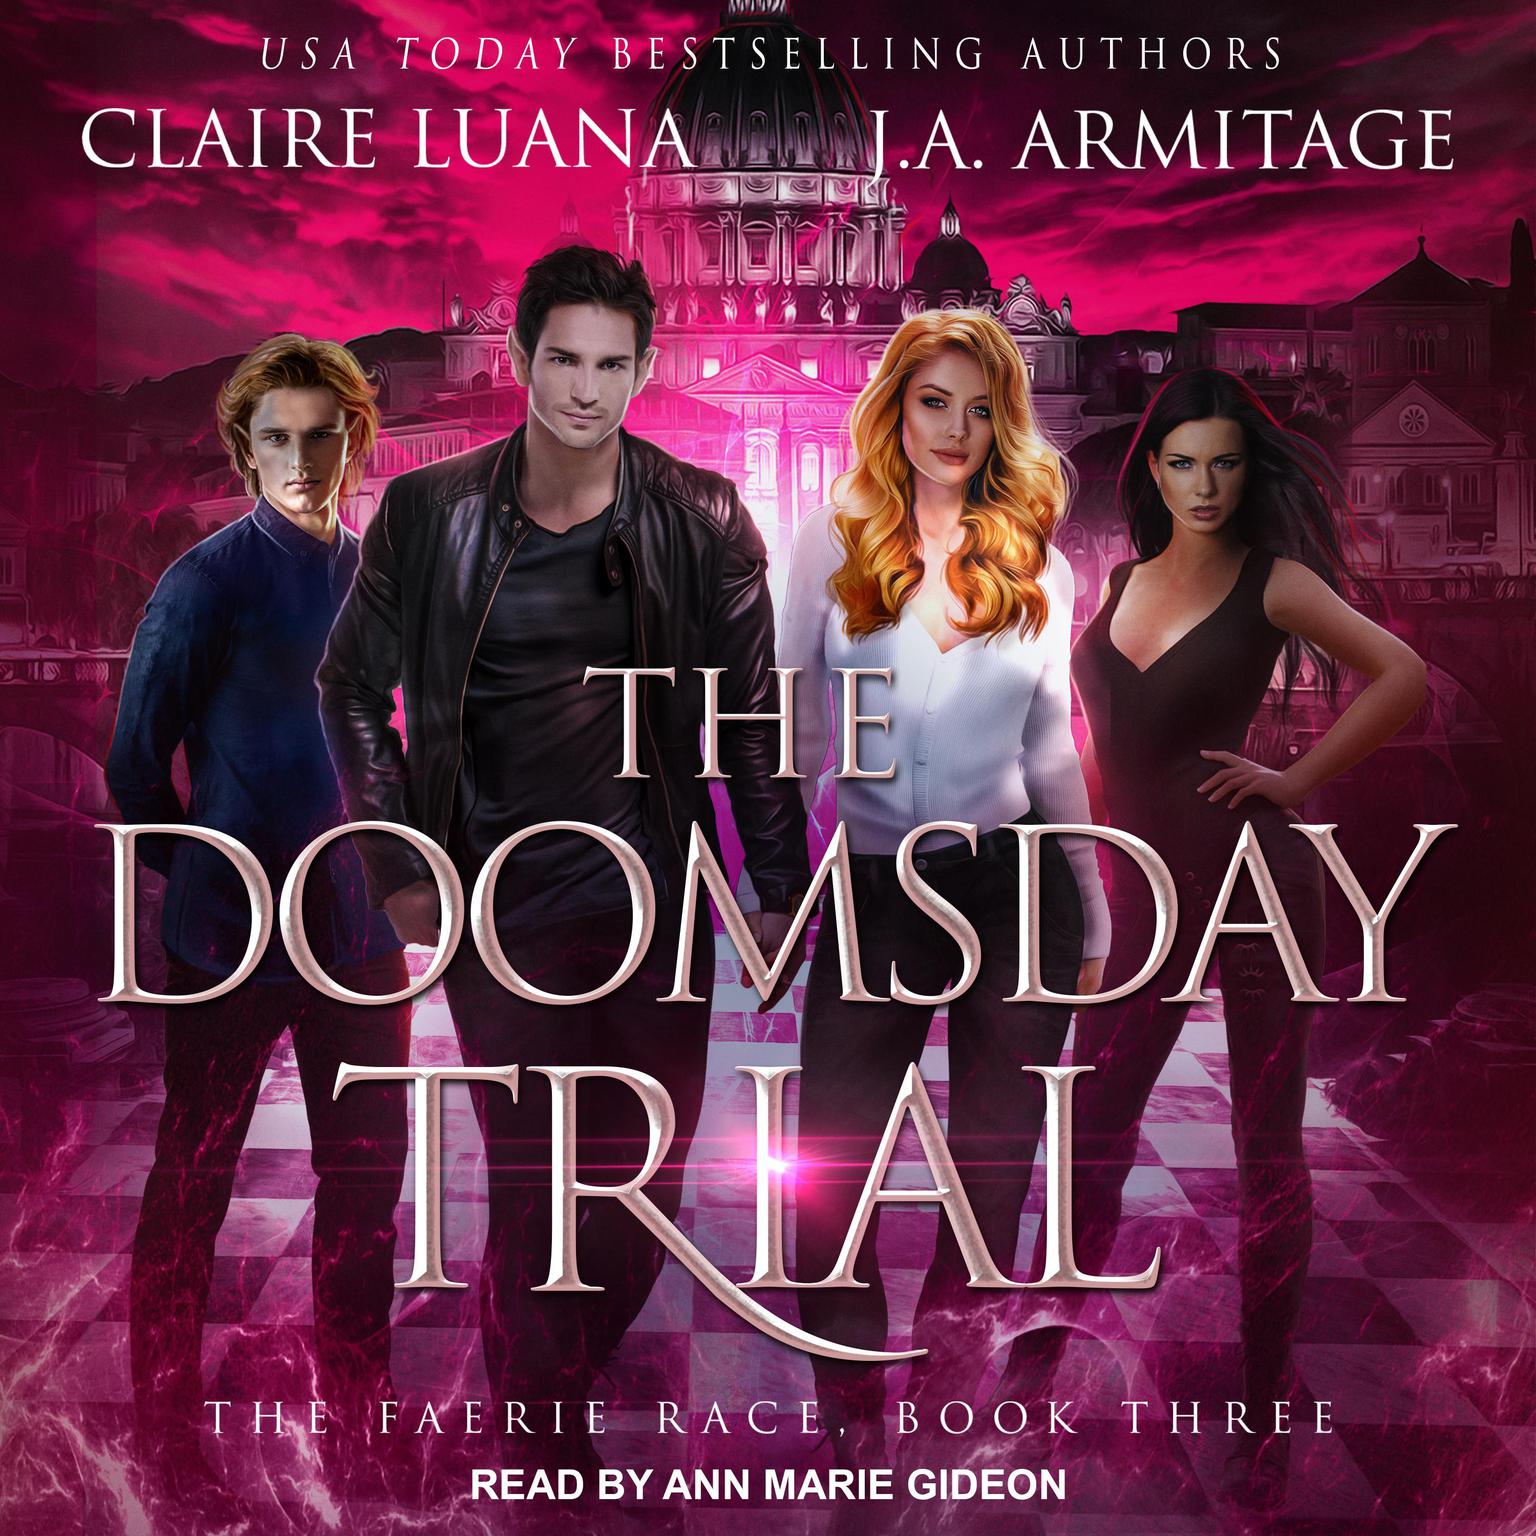 The Doomsday Trial Audiobook, by Claire Luana